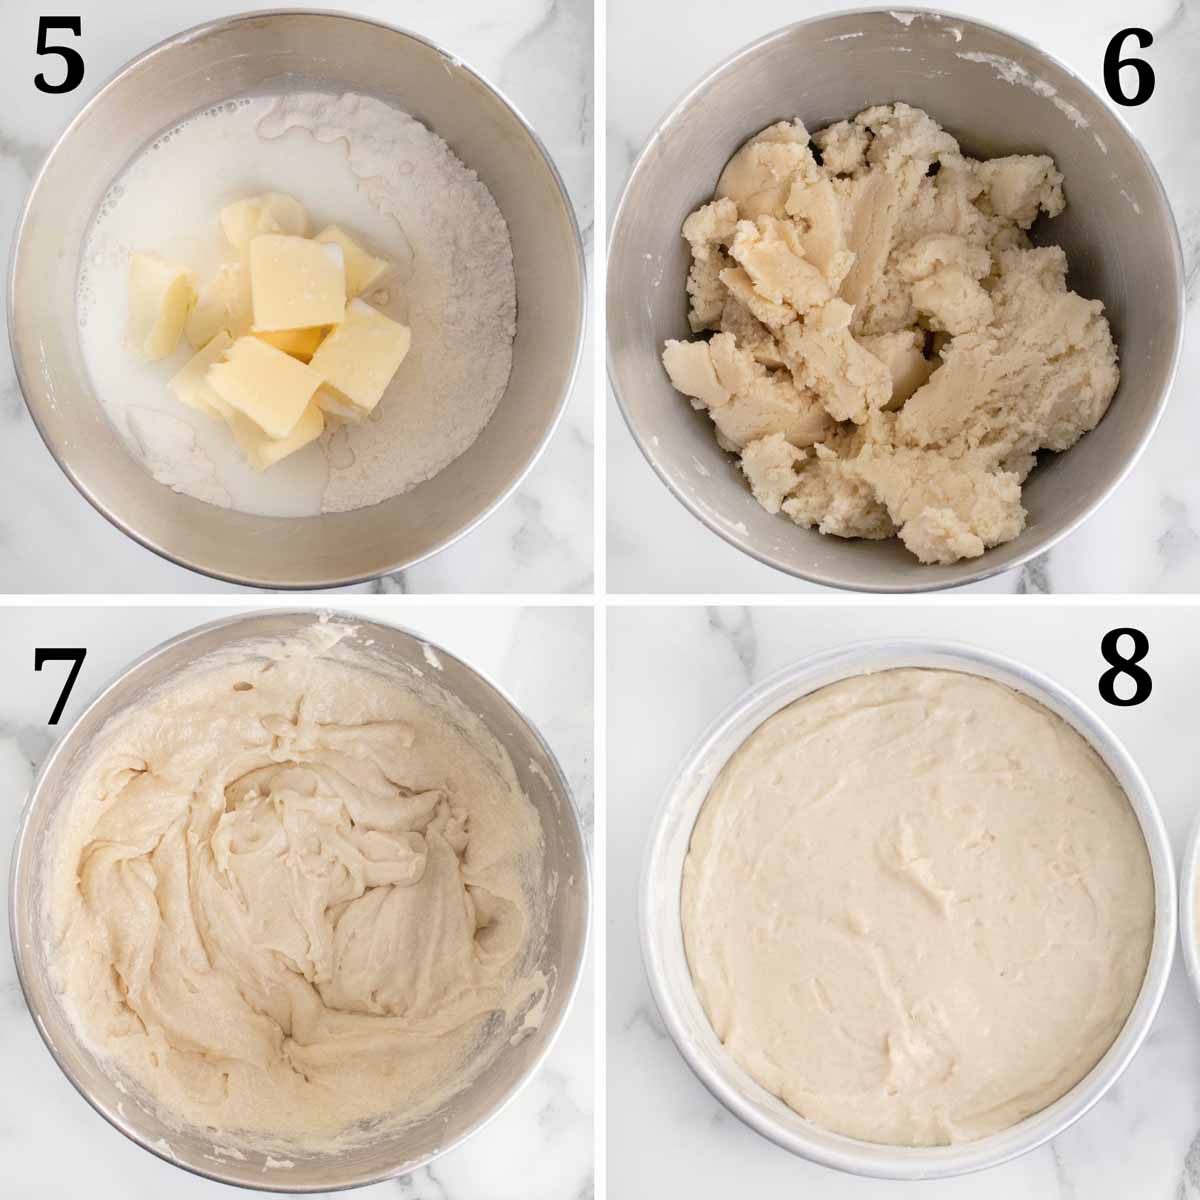 four images showing the next steps in making a white cake.